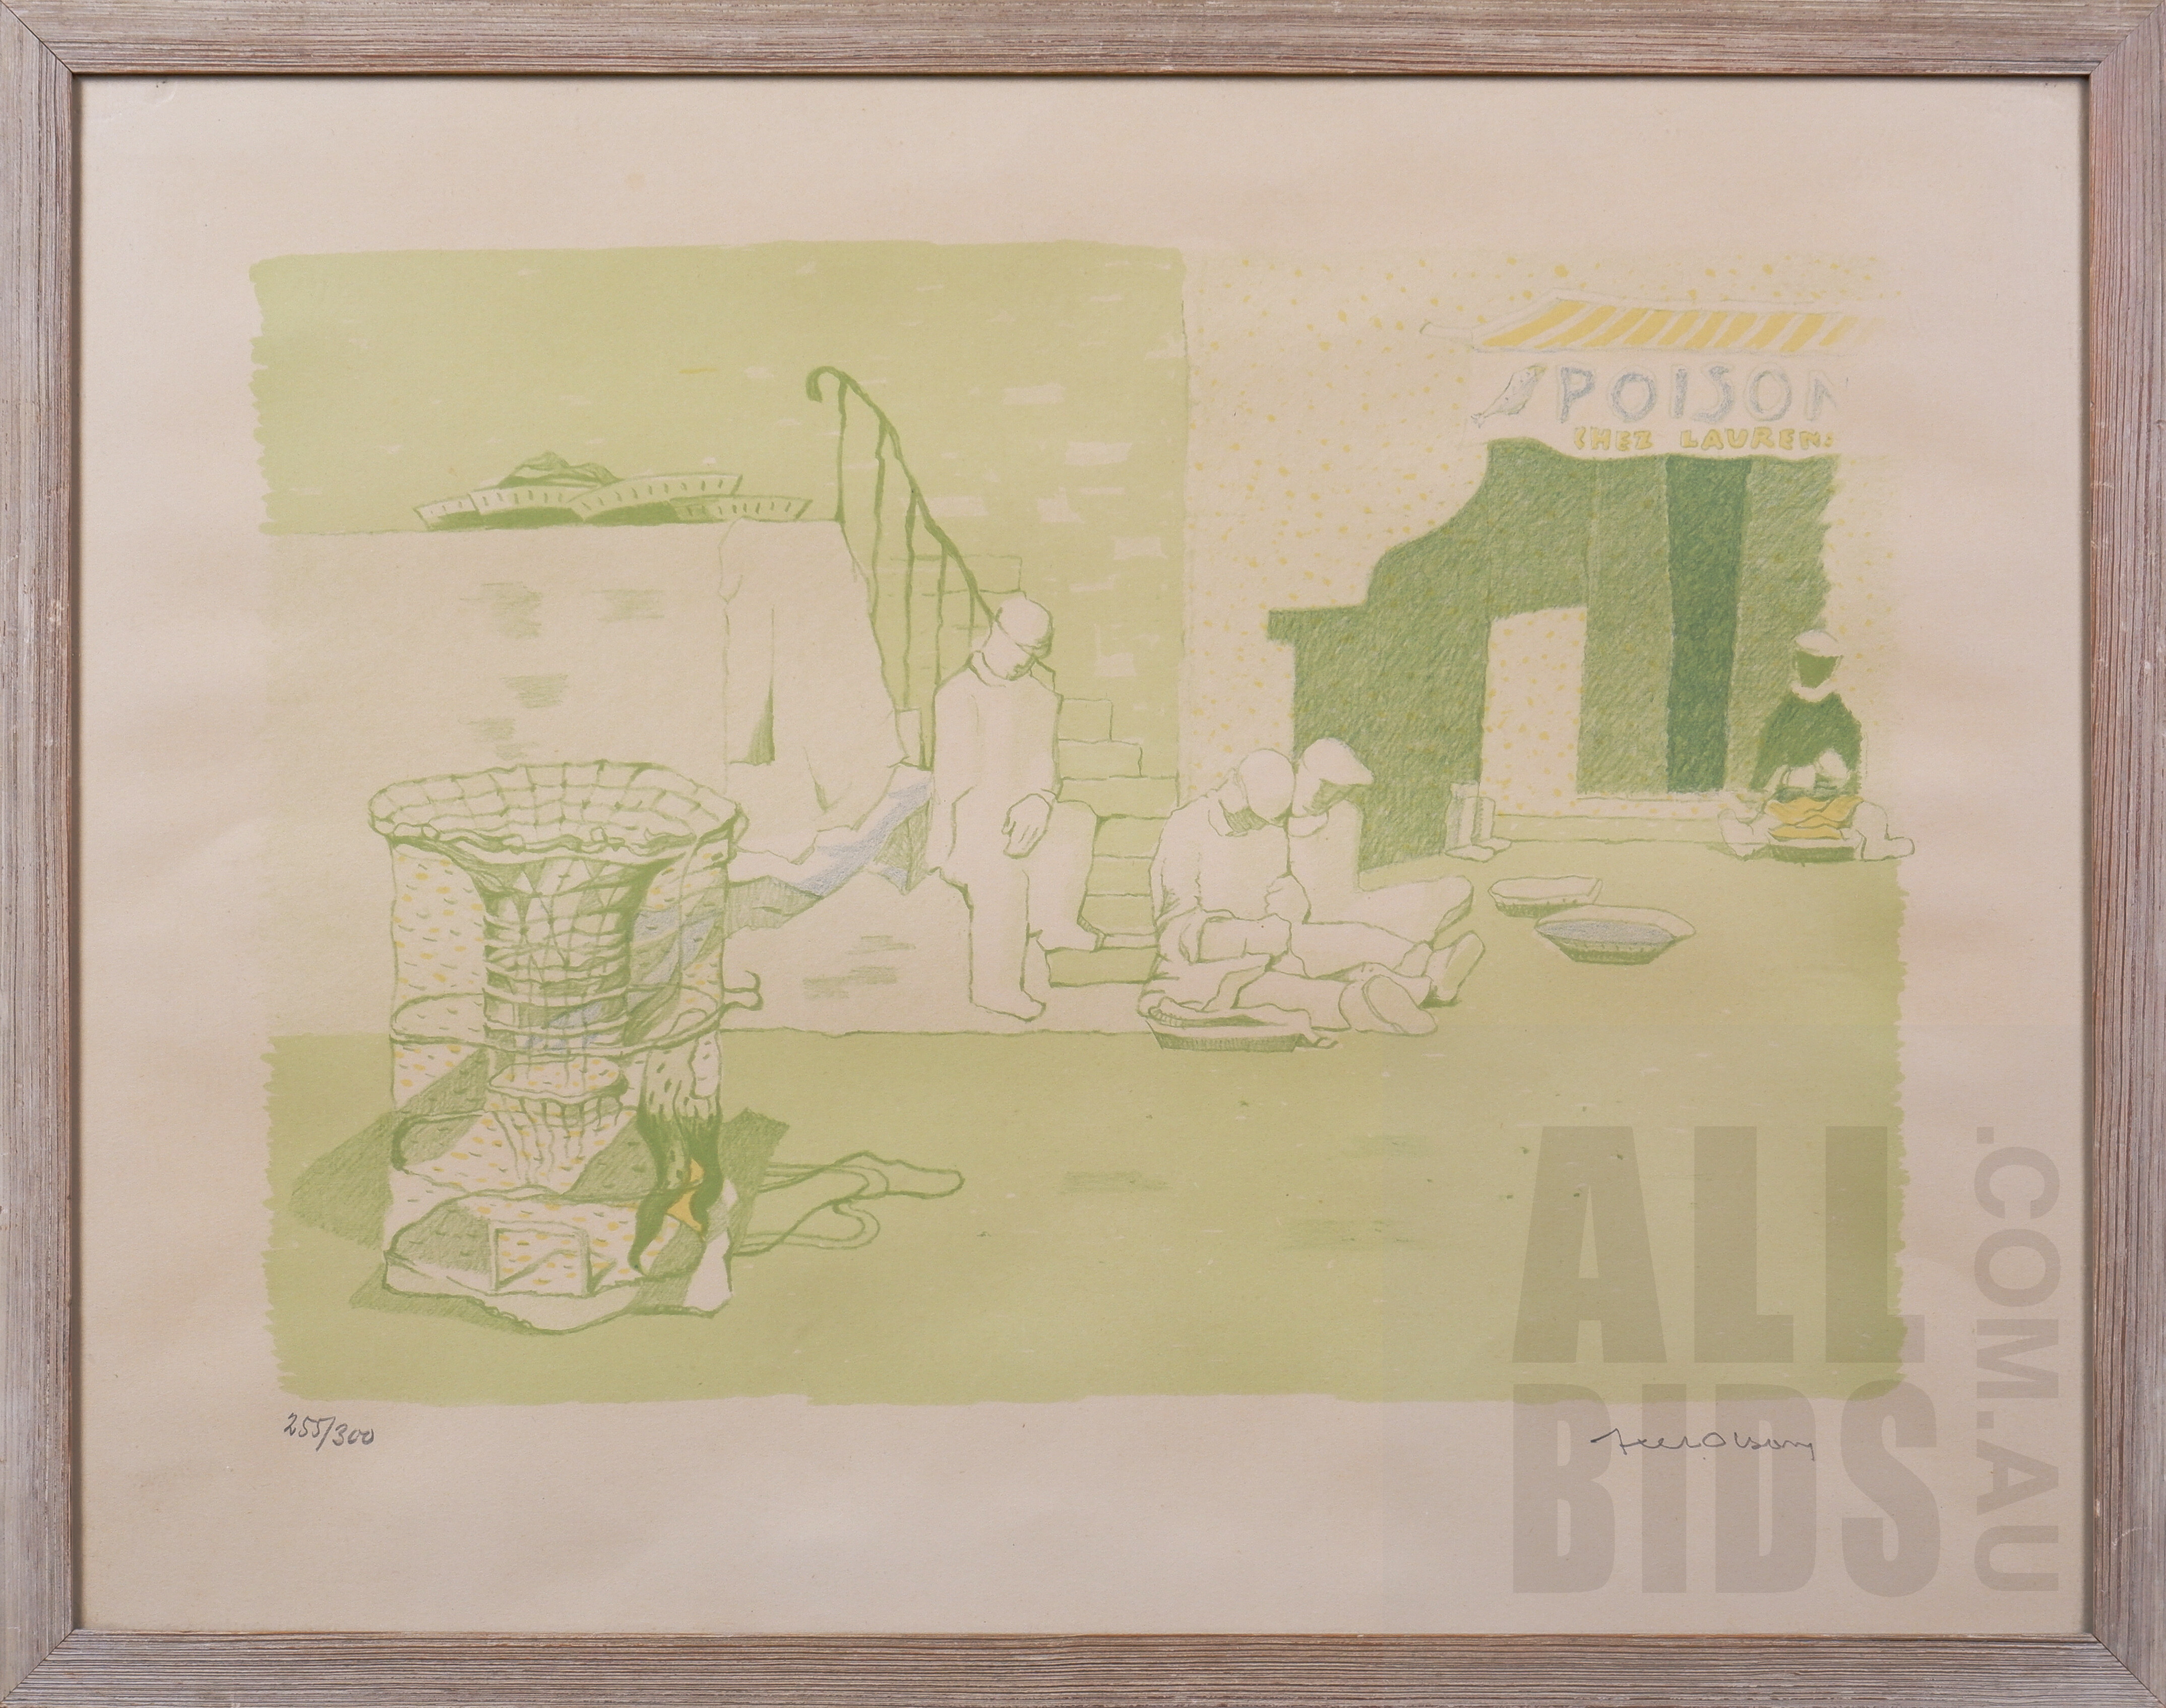 'Axel Olson (1889-1986, Swedish - Halmstad Group), French Harbour Scene, Colour Lithograph, 42 x 54 cm (incl. frame)'